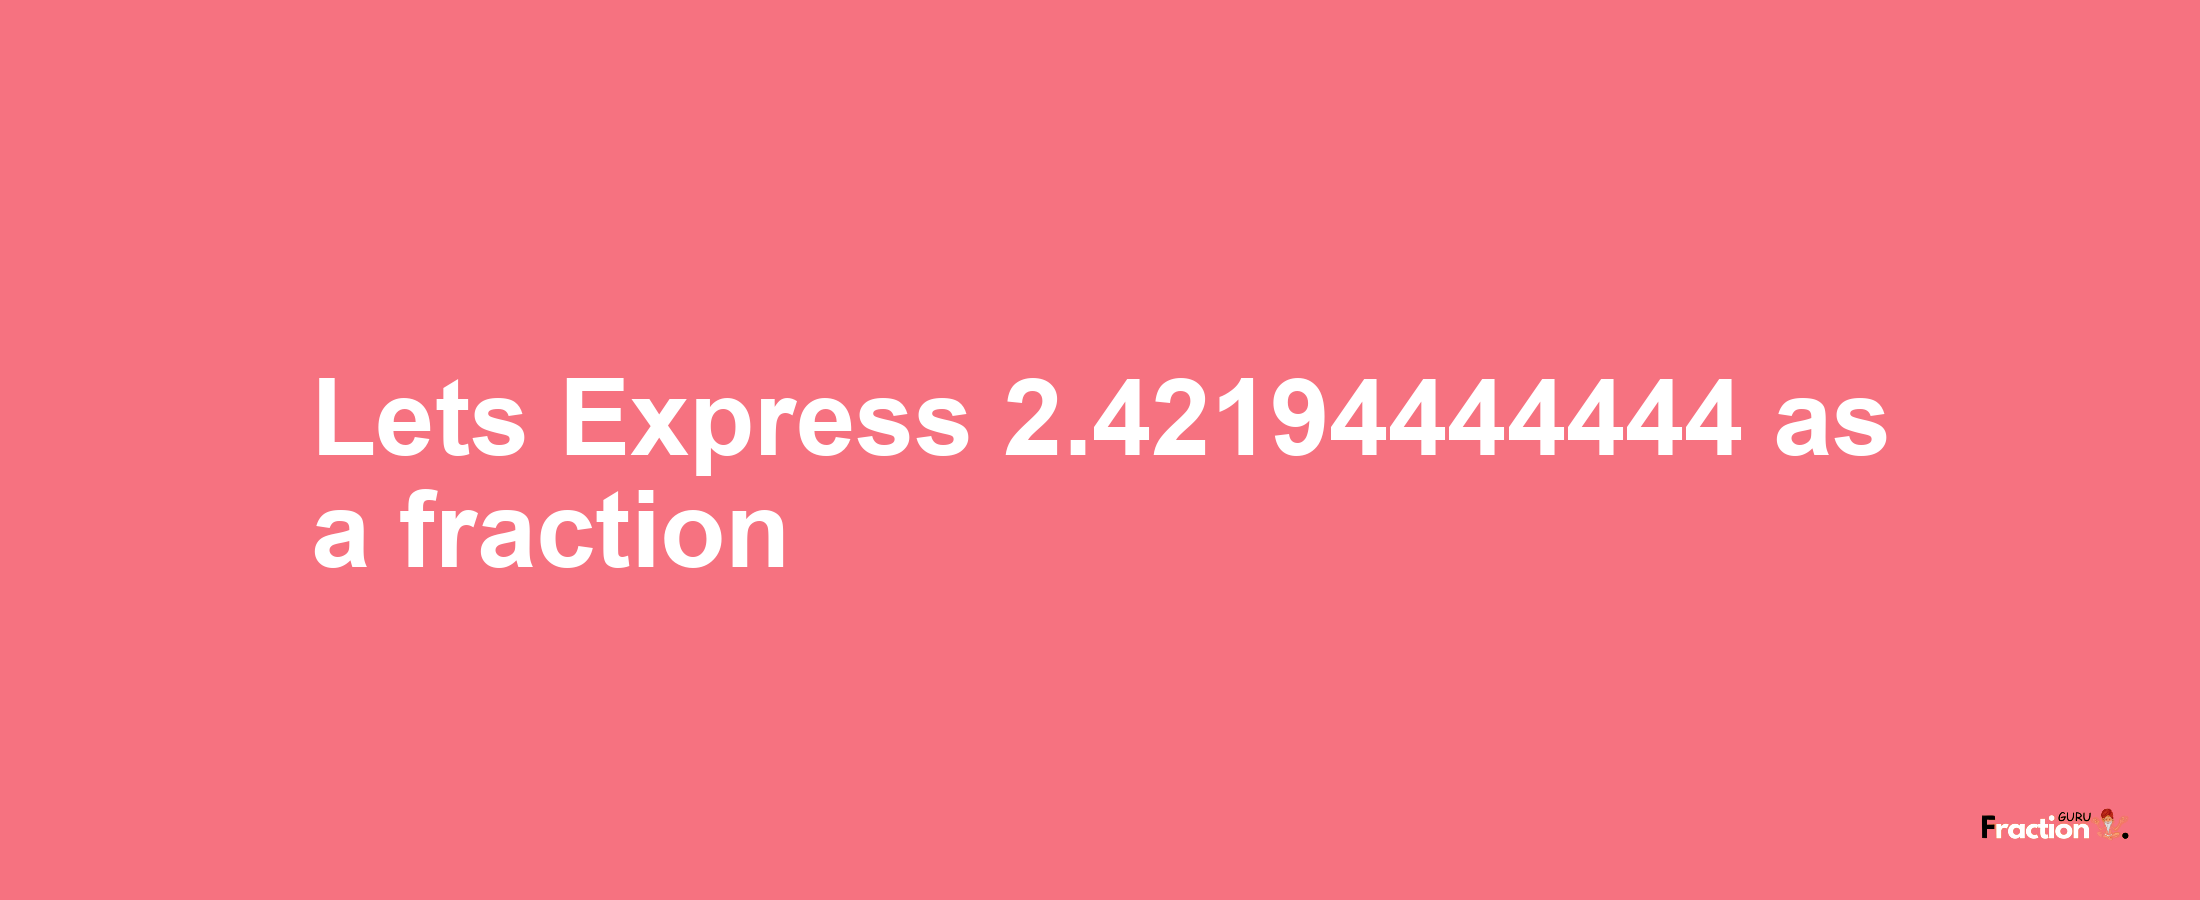 Lets Express 2.42194444444 as afraction